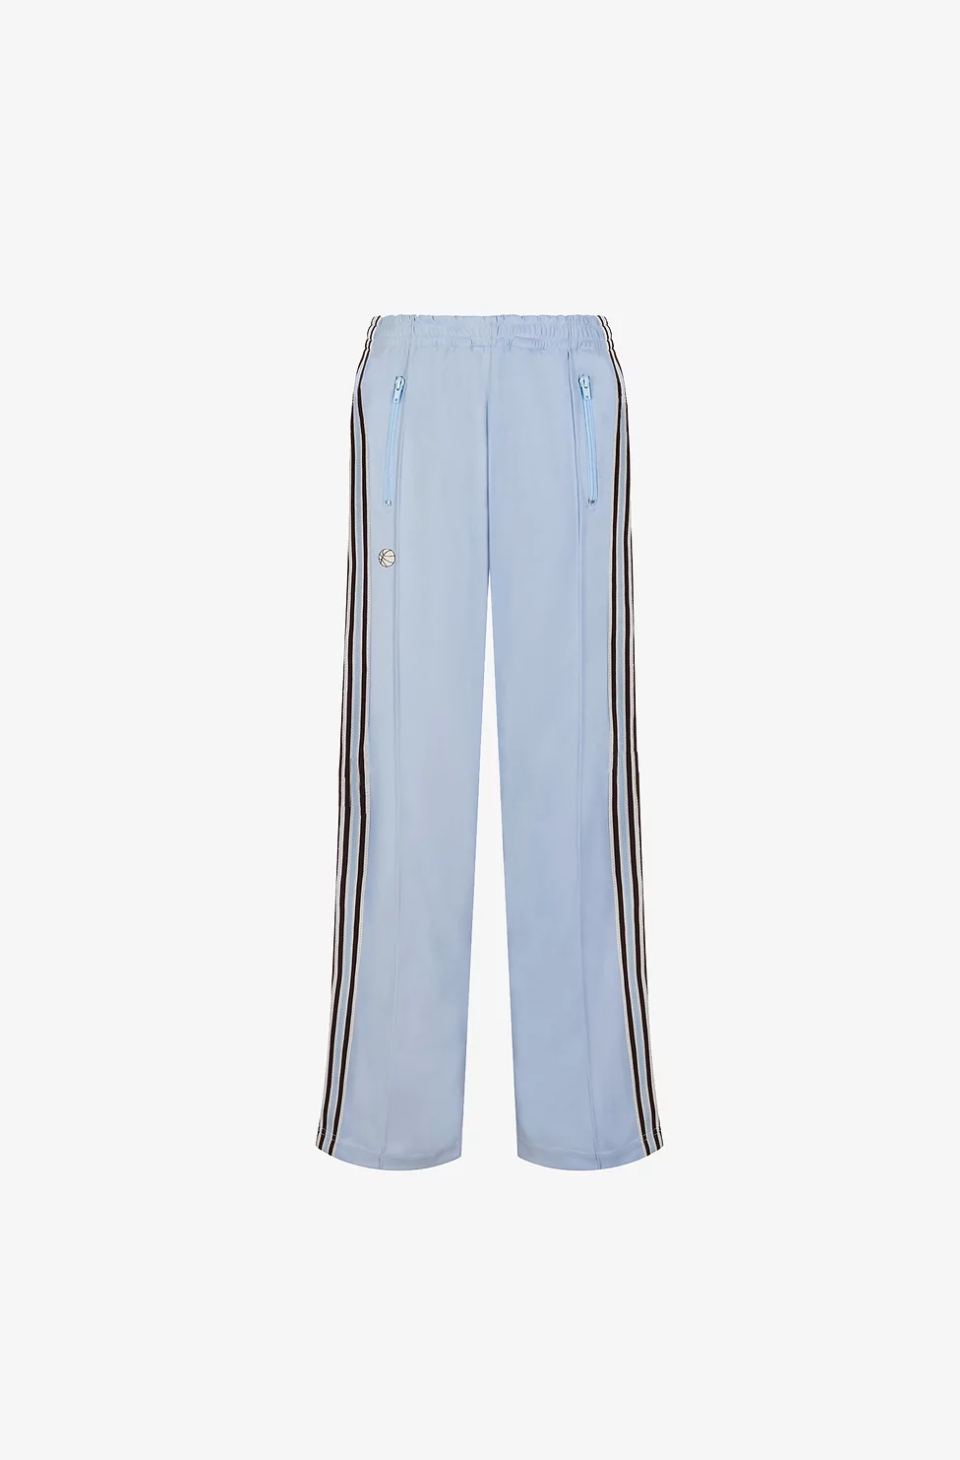 All Star Tracksuit Pants